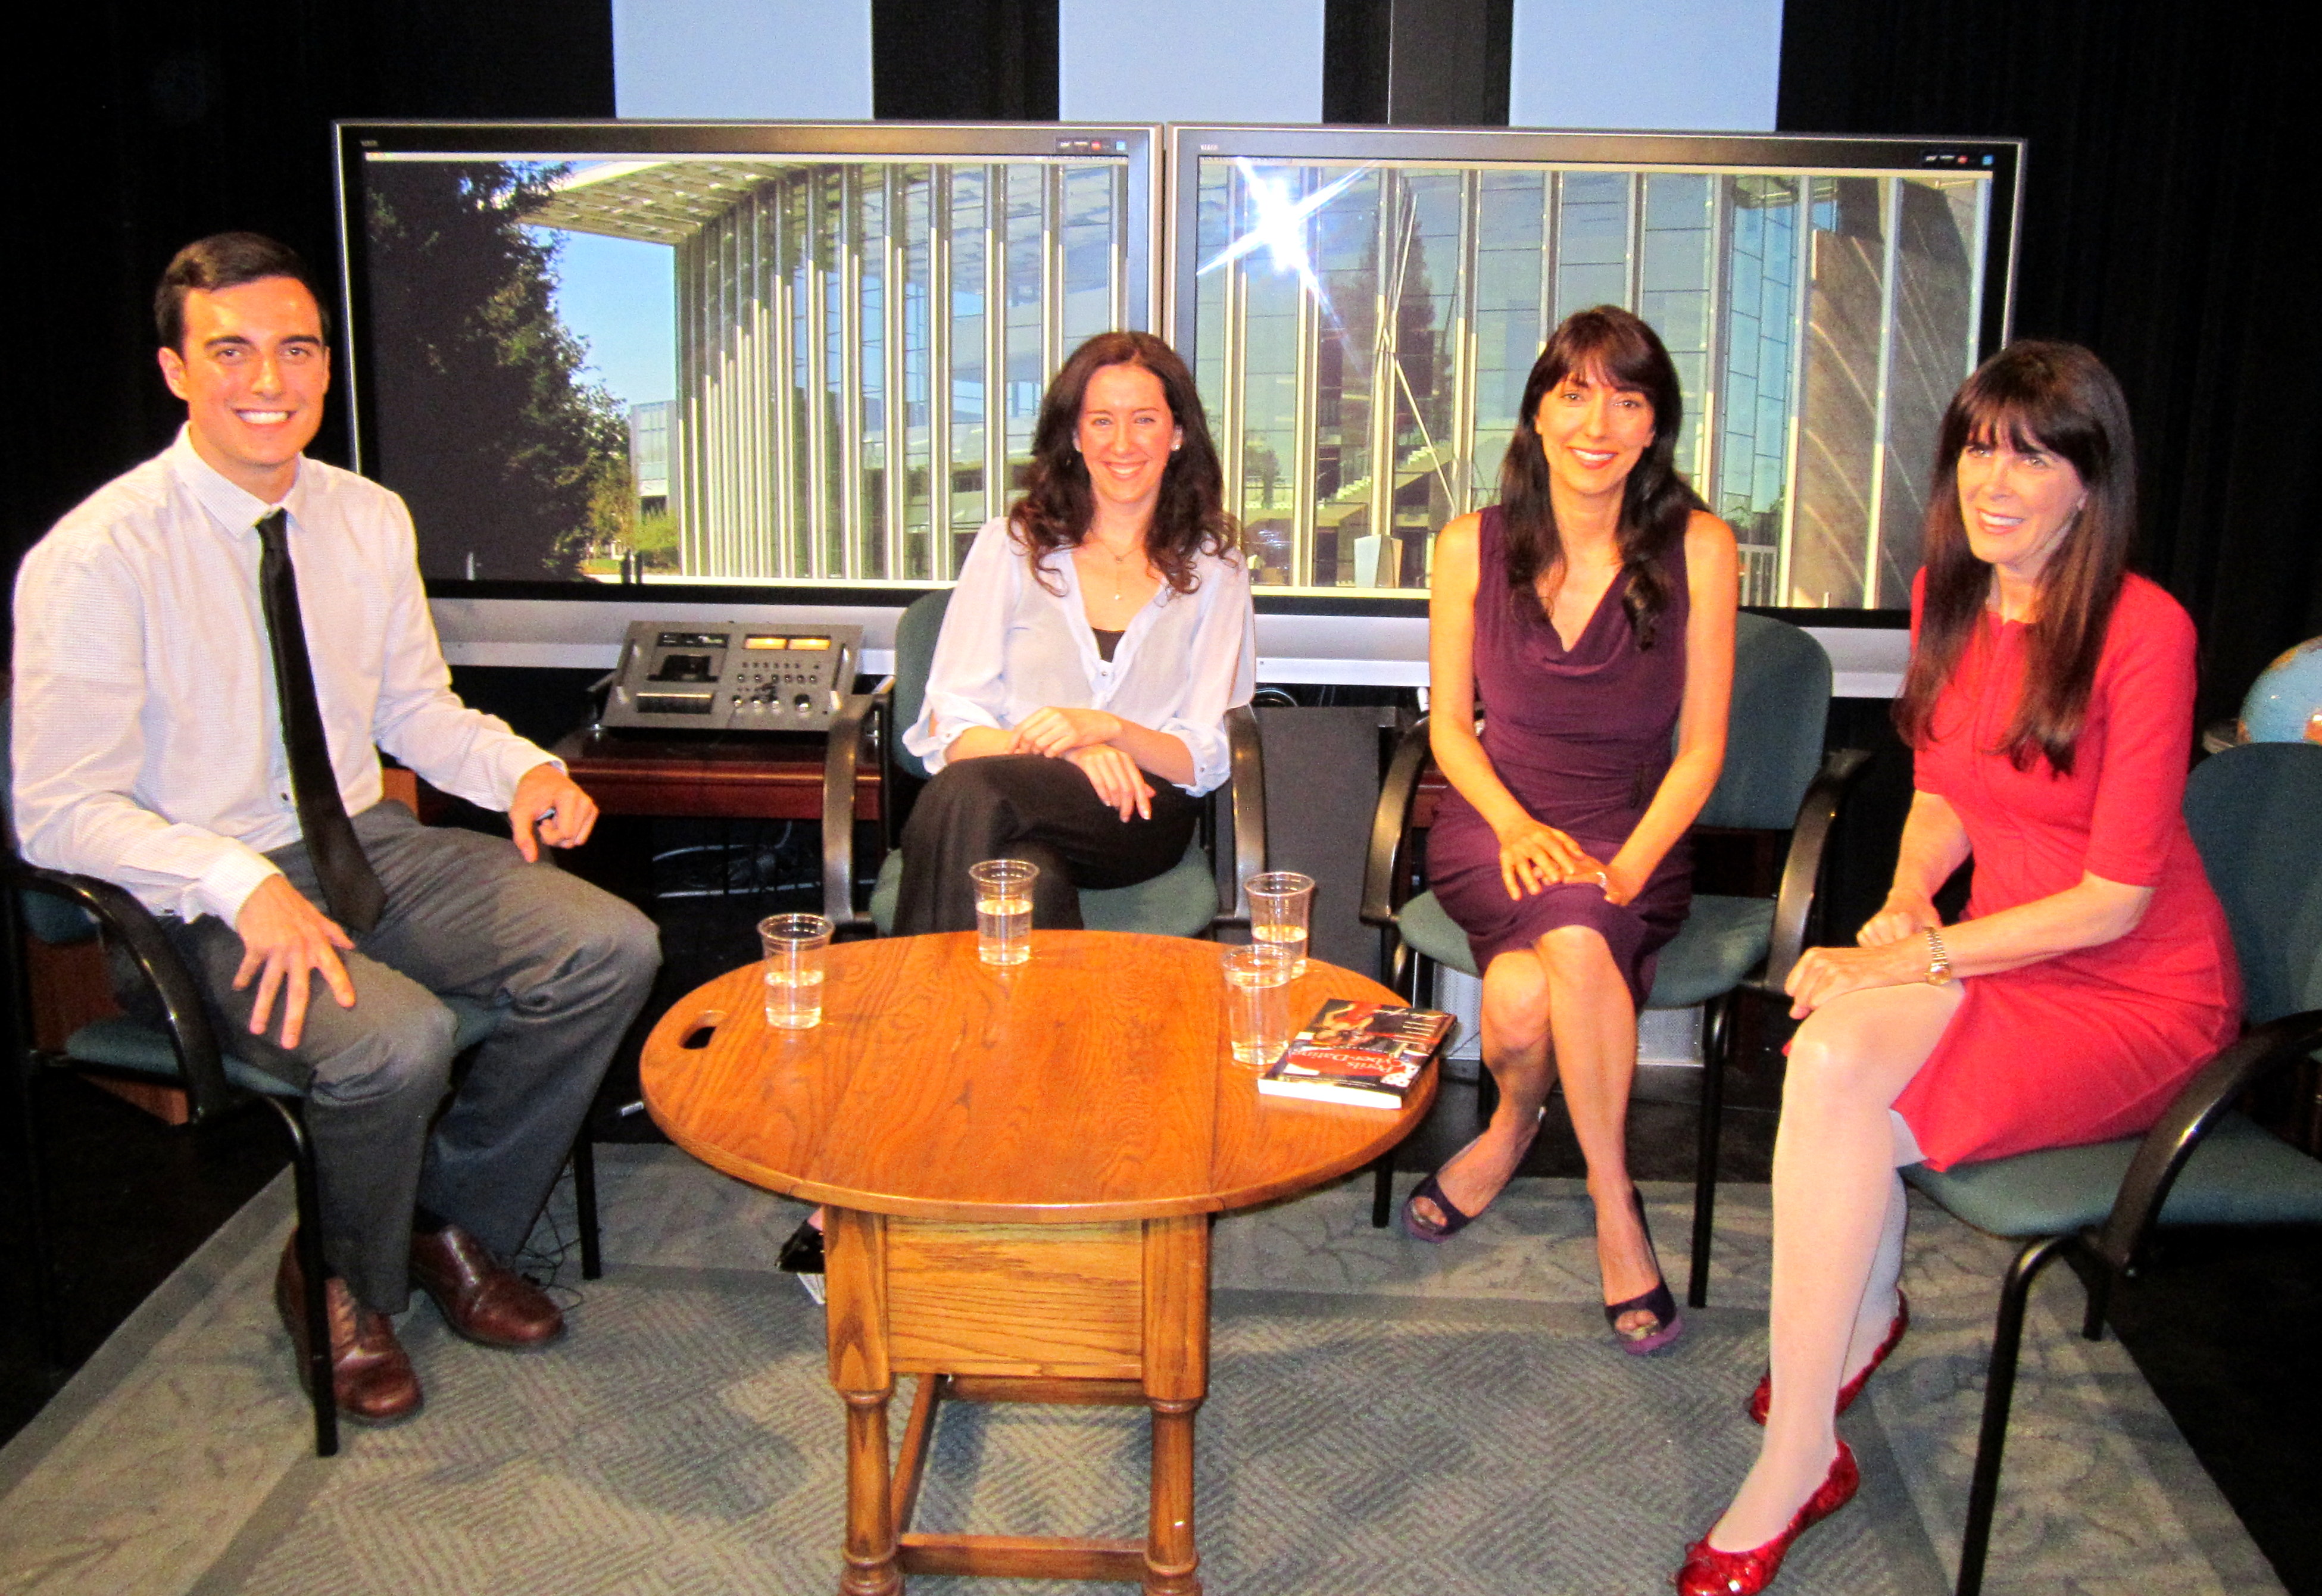 Dr. Luciana Lagana as the psychology/dating expert on CSUN On Point TV News Show (04/22/14) with host Alex Milojkovich and guest speakers Allison Cohen and Julie Spira.